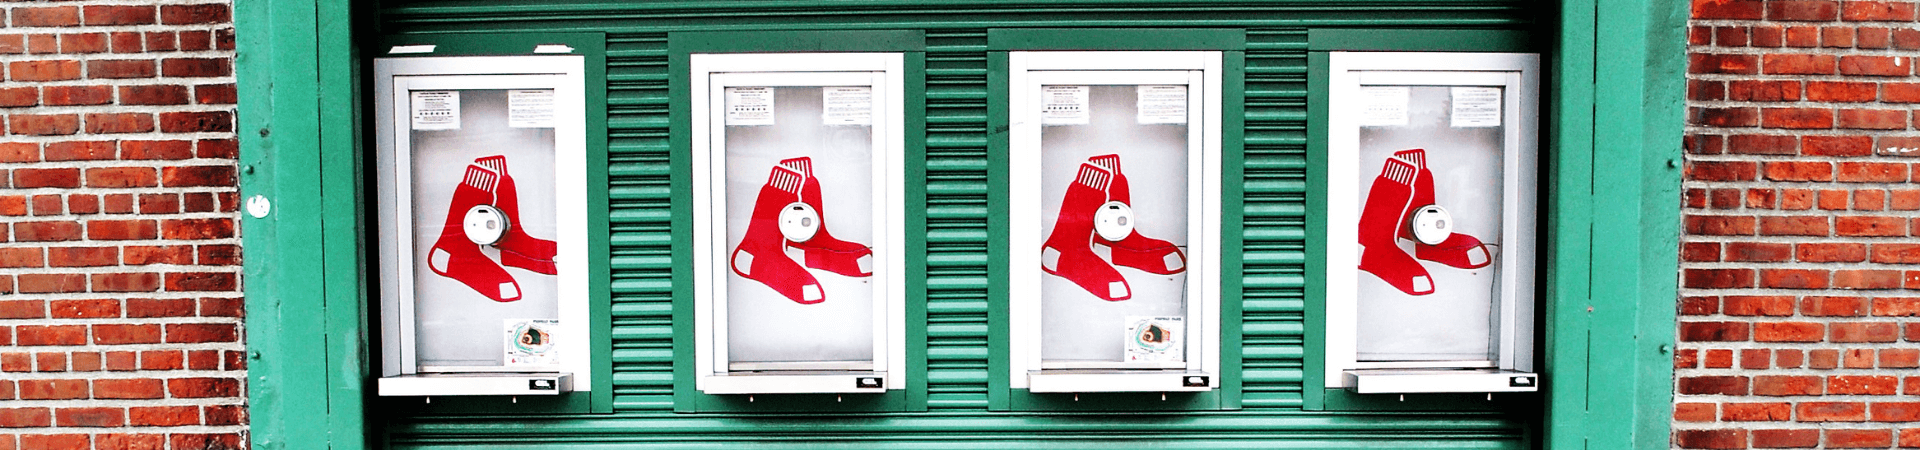 Four red sox ticket windows at Fenway Park.